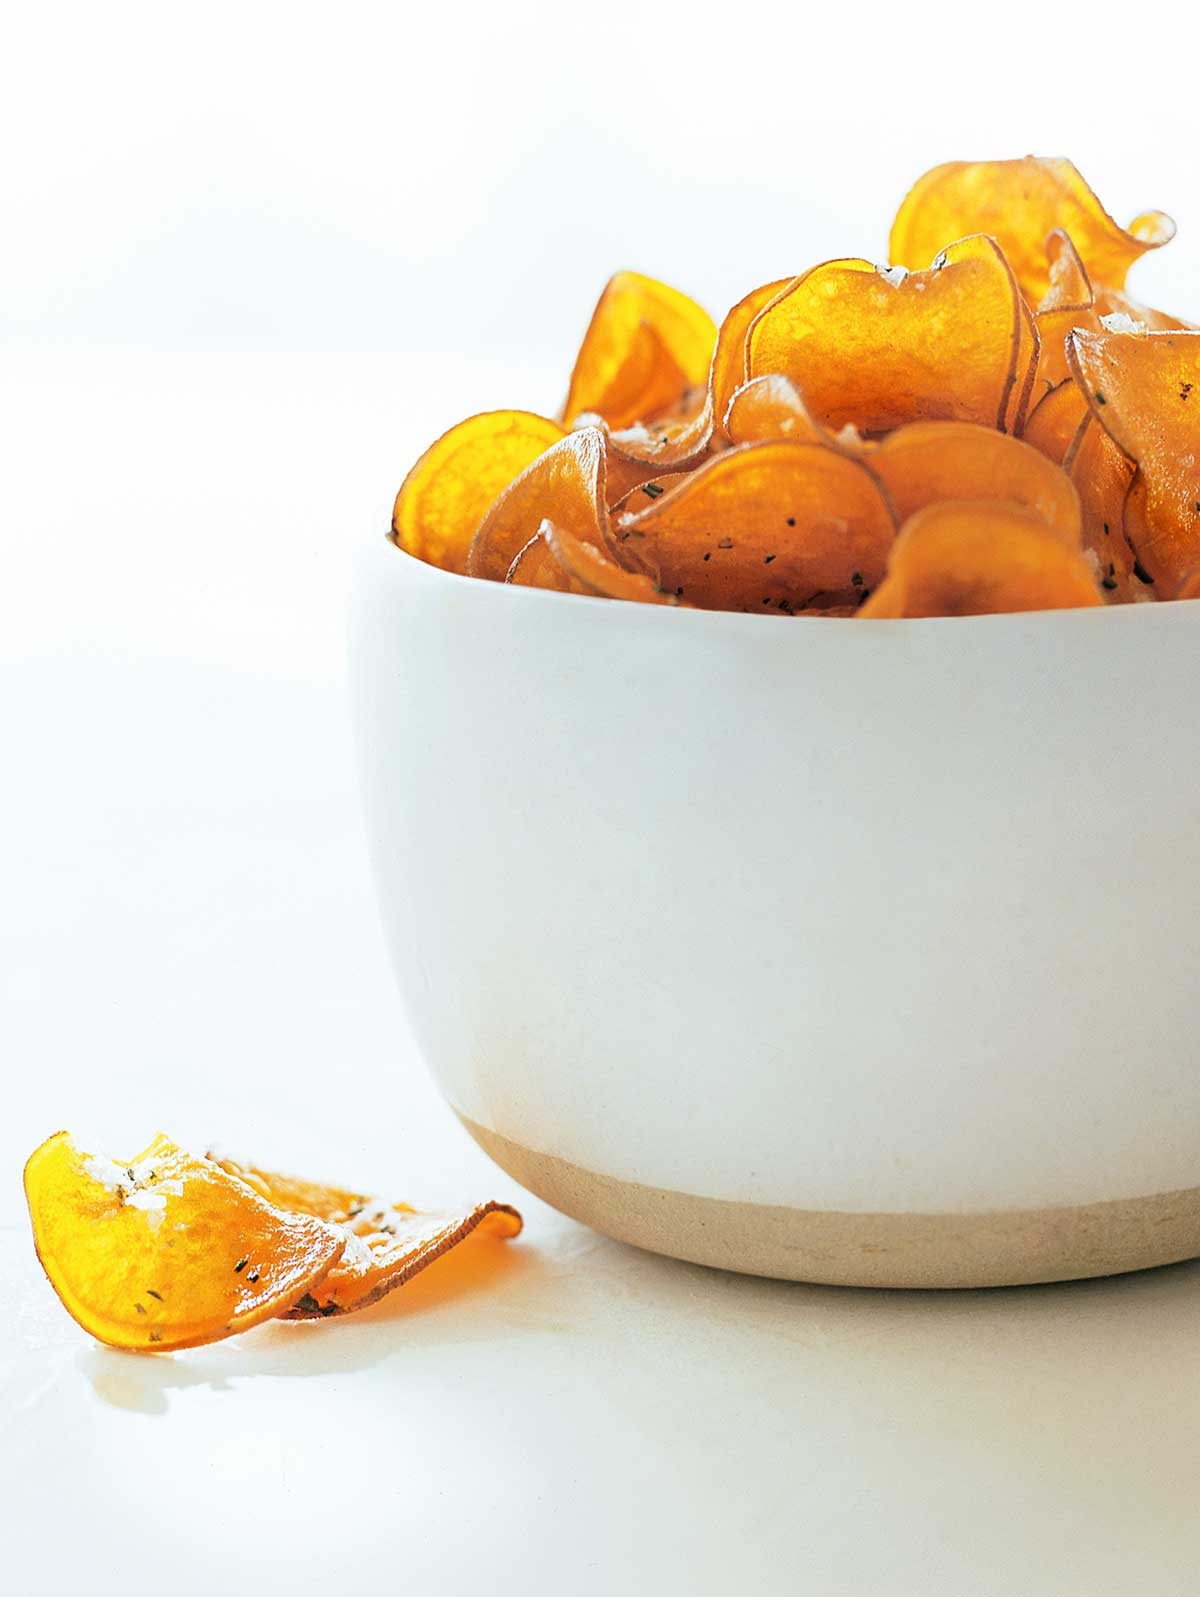 Sea salt-rosemary sweet potato chips piled in a white bowl, with a few laying beside it.